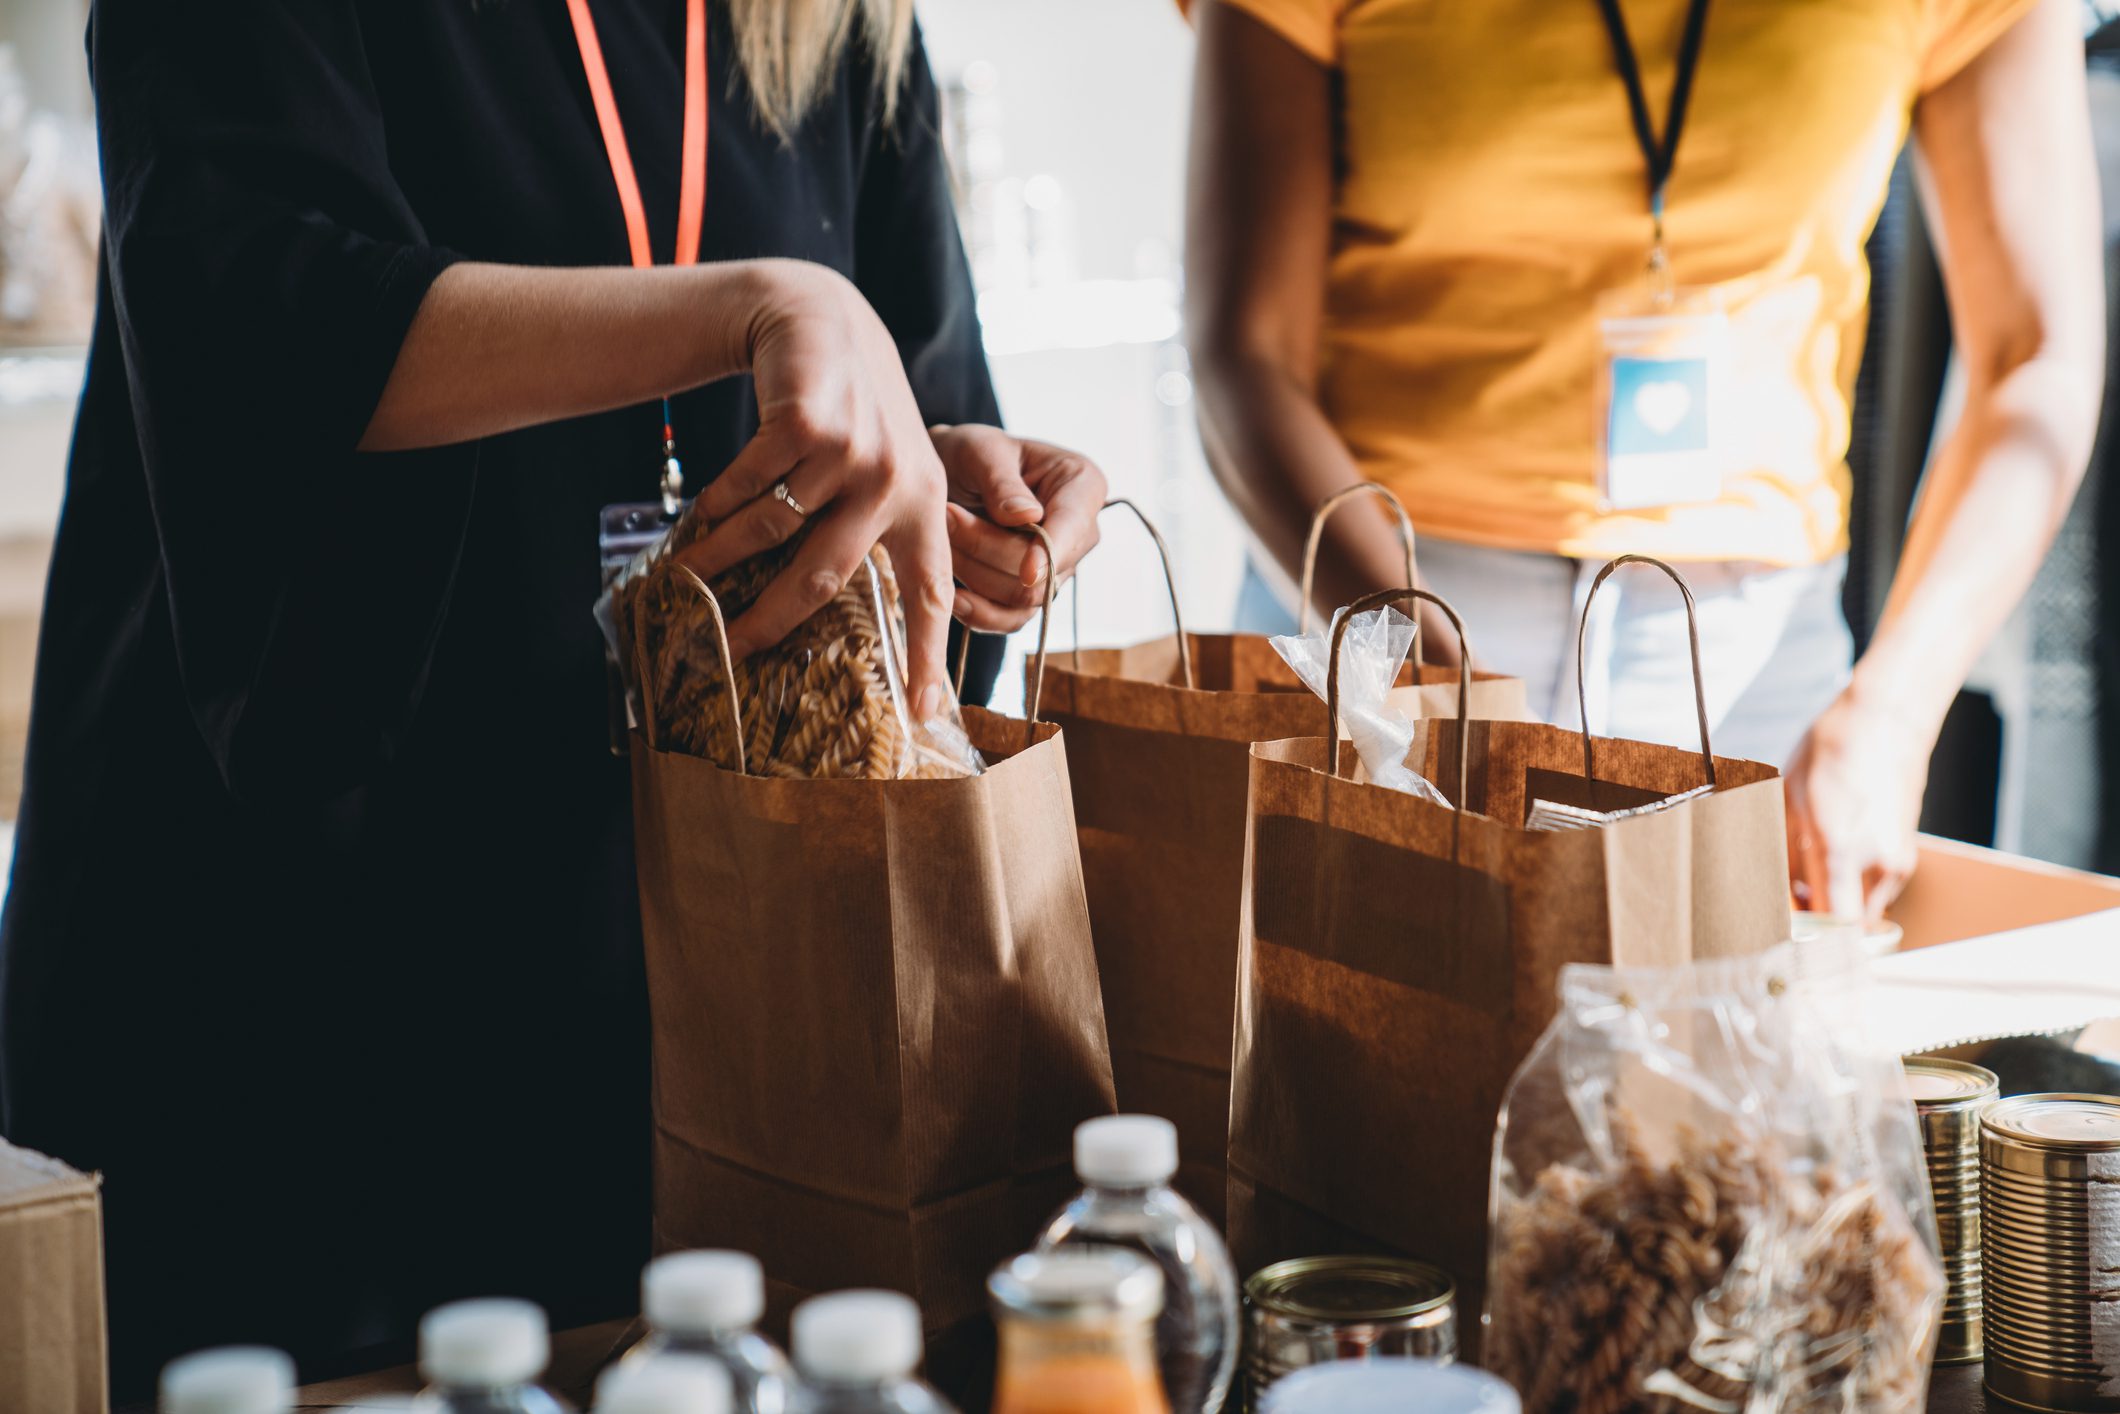 Woman making a charitable contribuion through bagging food for those in need